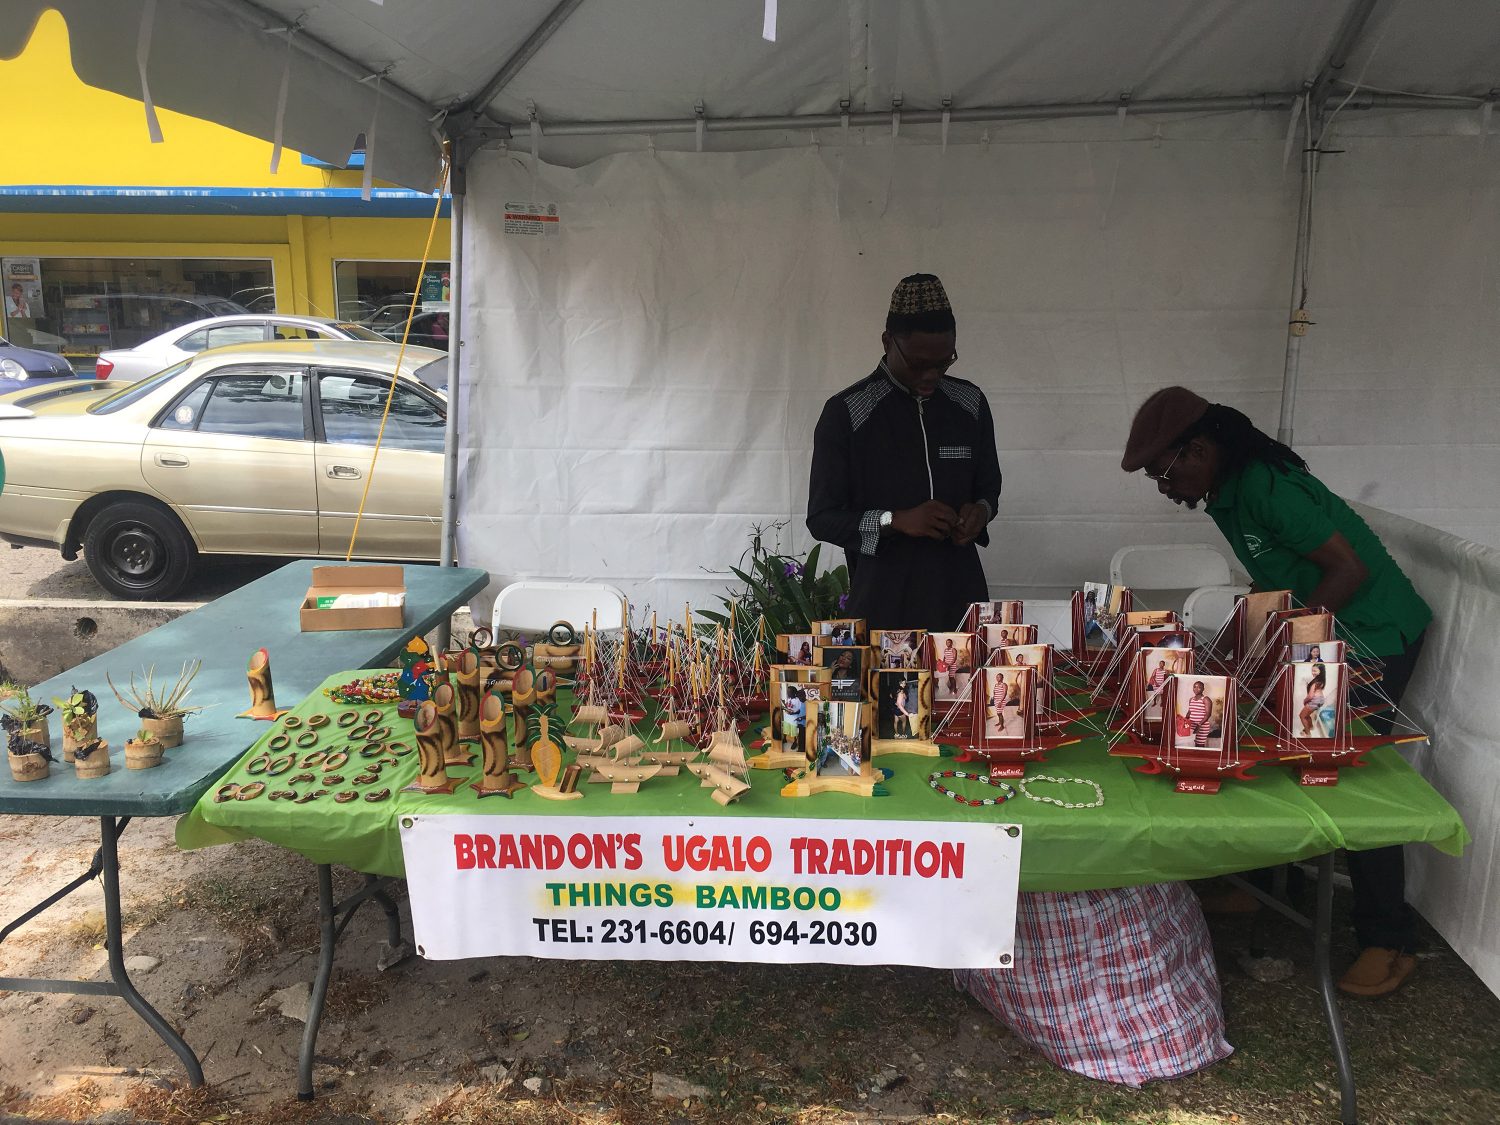 Brandon’s Ugalo Tradition’s craft items that were made from bamboo on display at the event yesterday. 